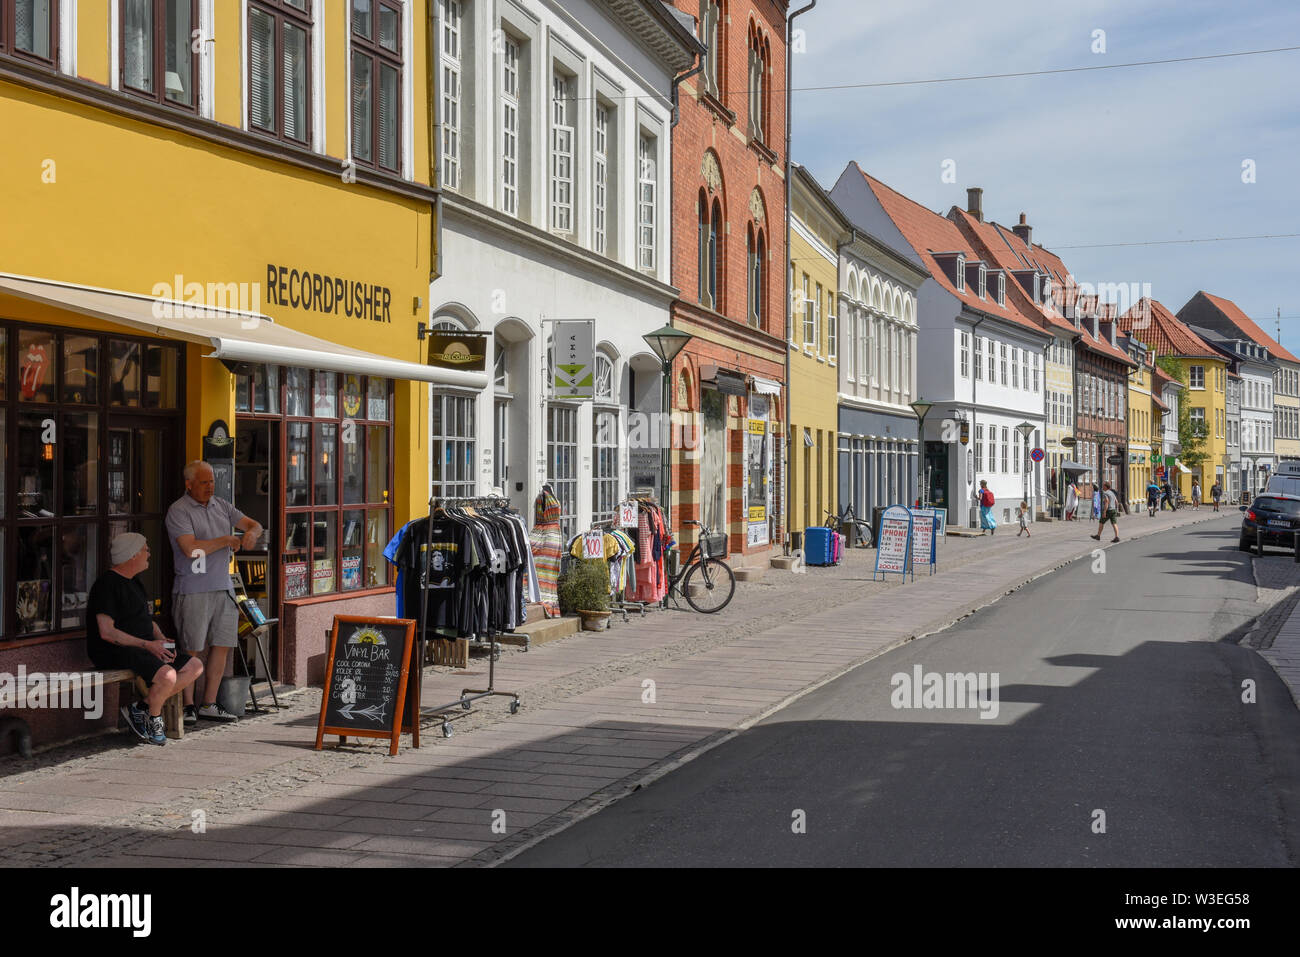 Odense Denmark 24 June 19 People Shopping In The Old Houses Of Odense On Denmark Stock Photo Alamy